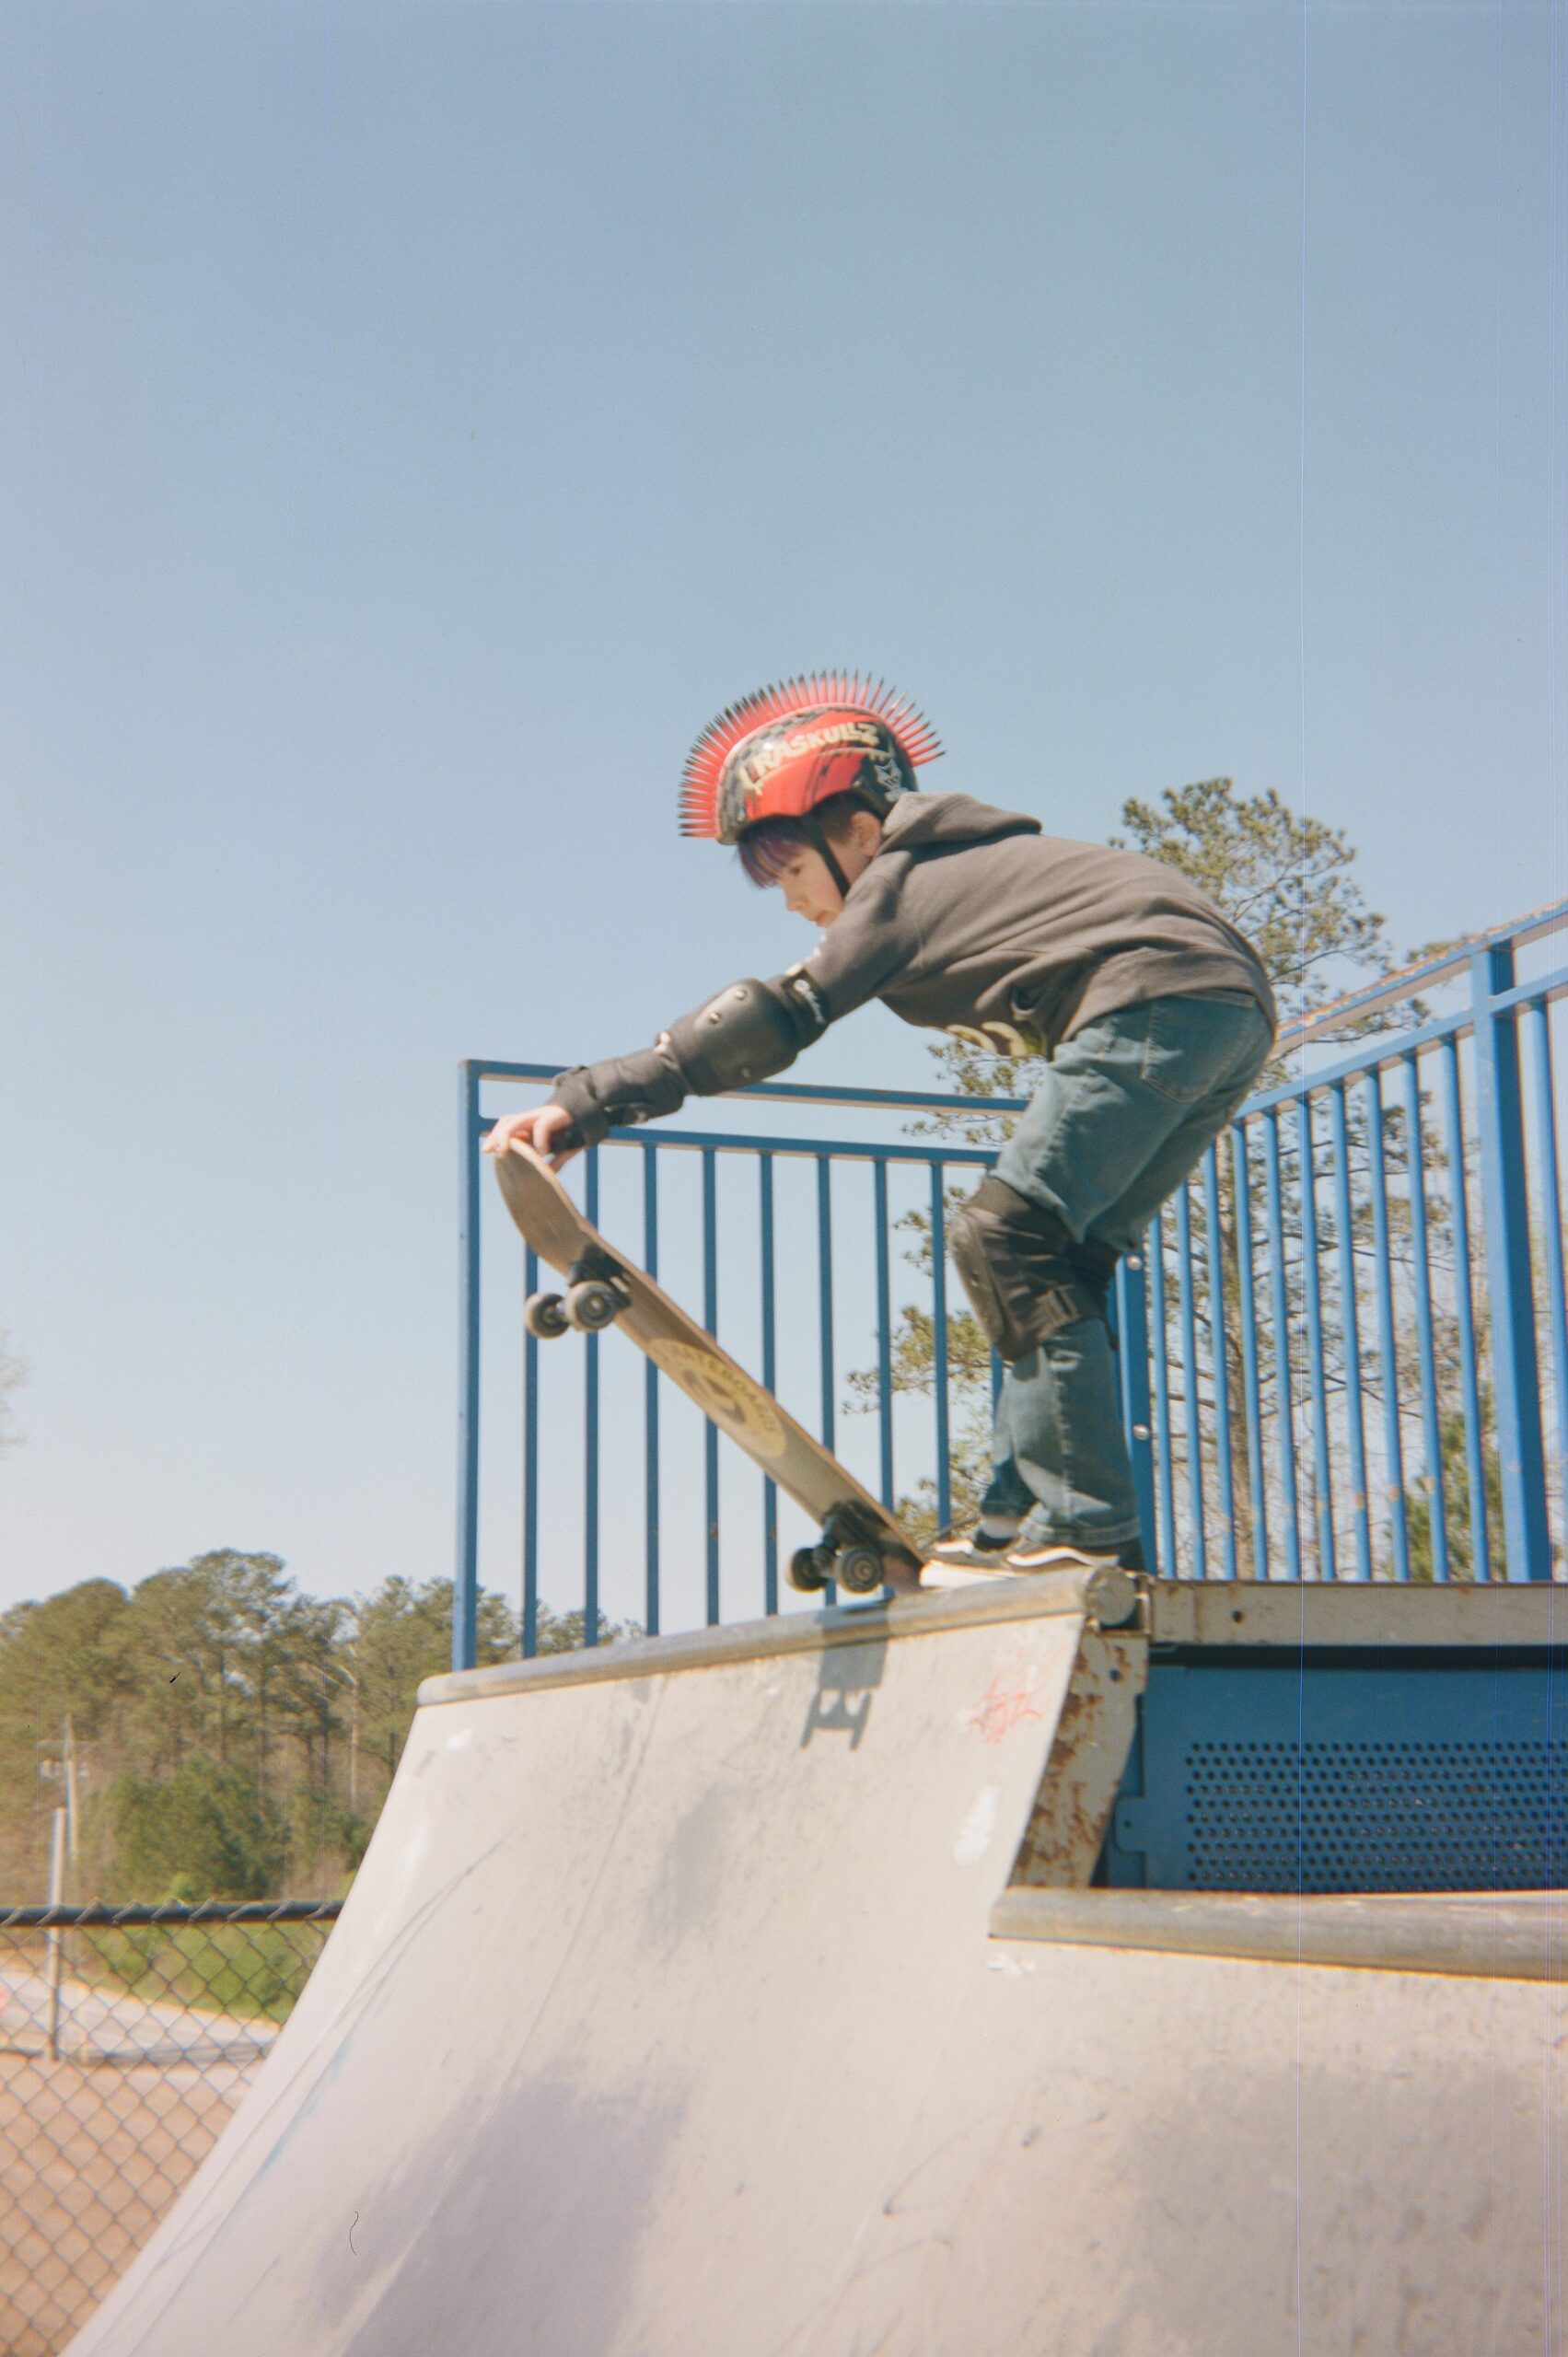 Little boy with a skateboard posed at the top of a half-pipe